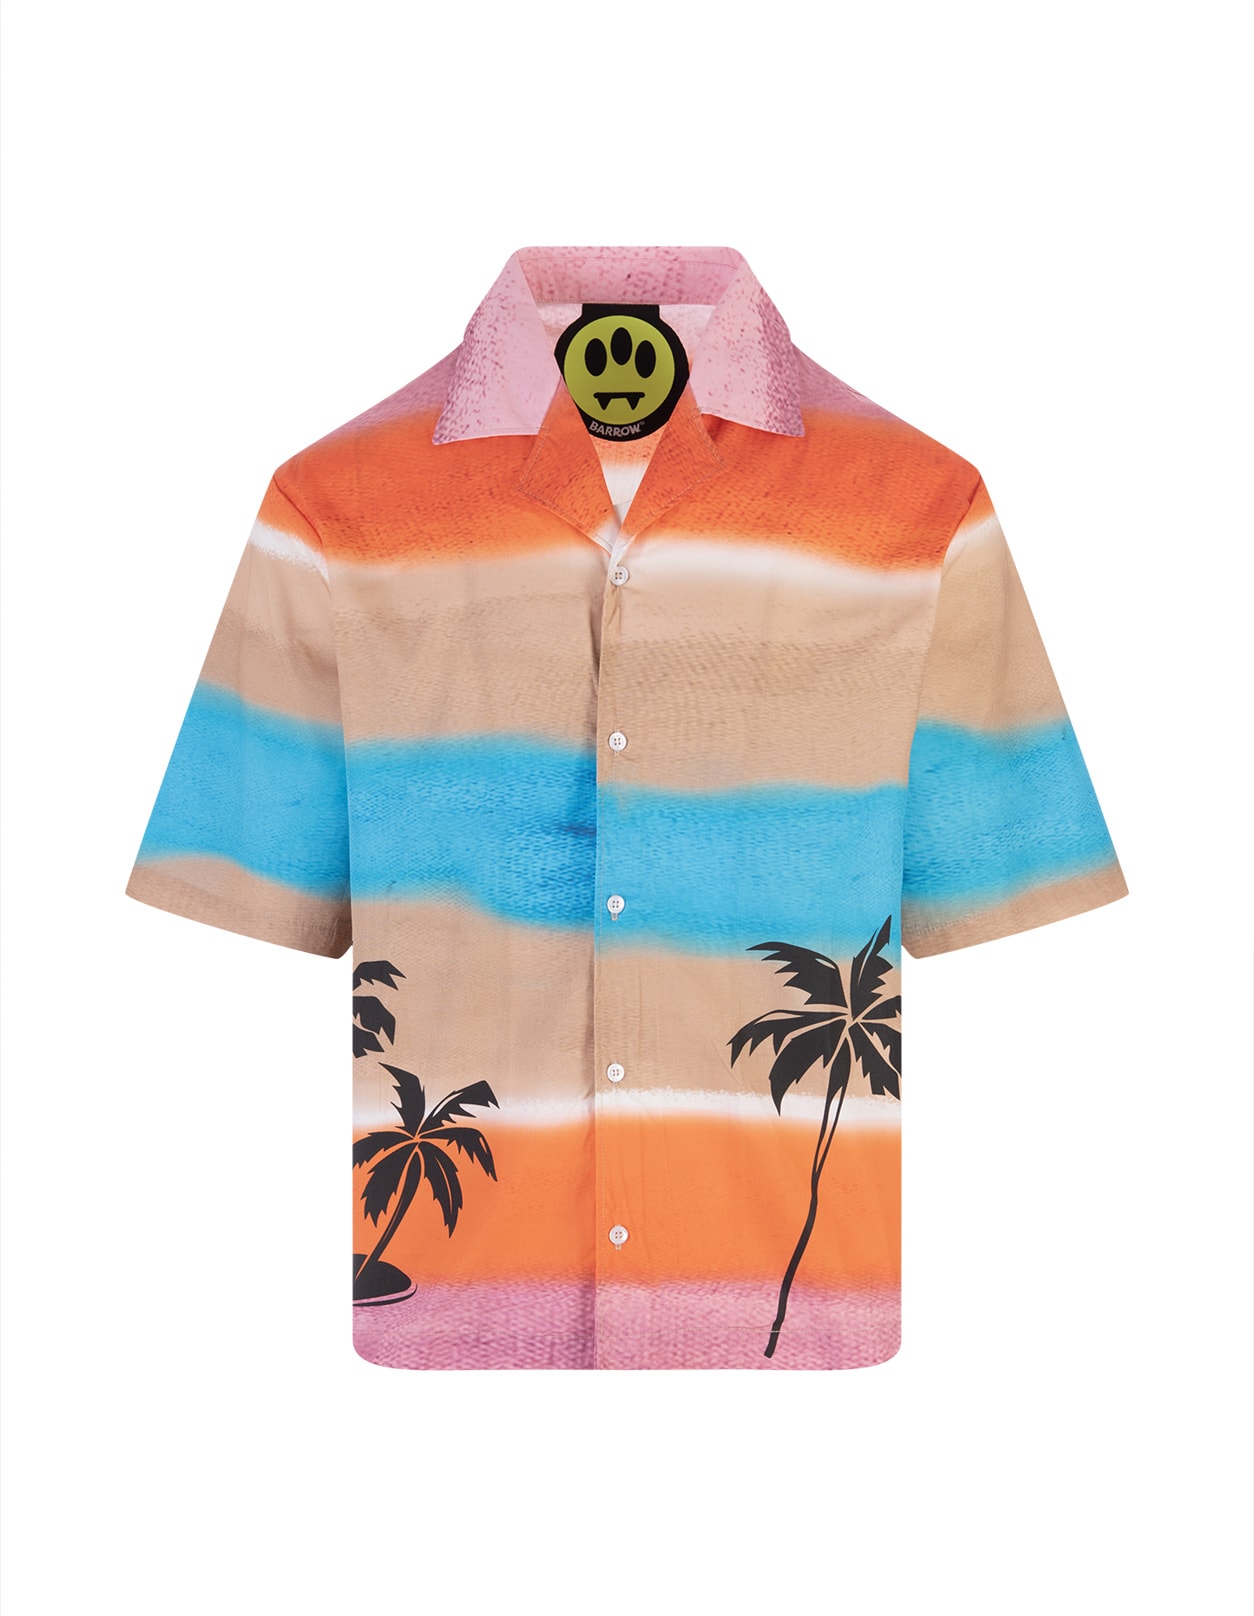 BARROW MULTICOLOURED BOWLING SHIRT WITH LOGO AND PALM TREES